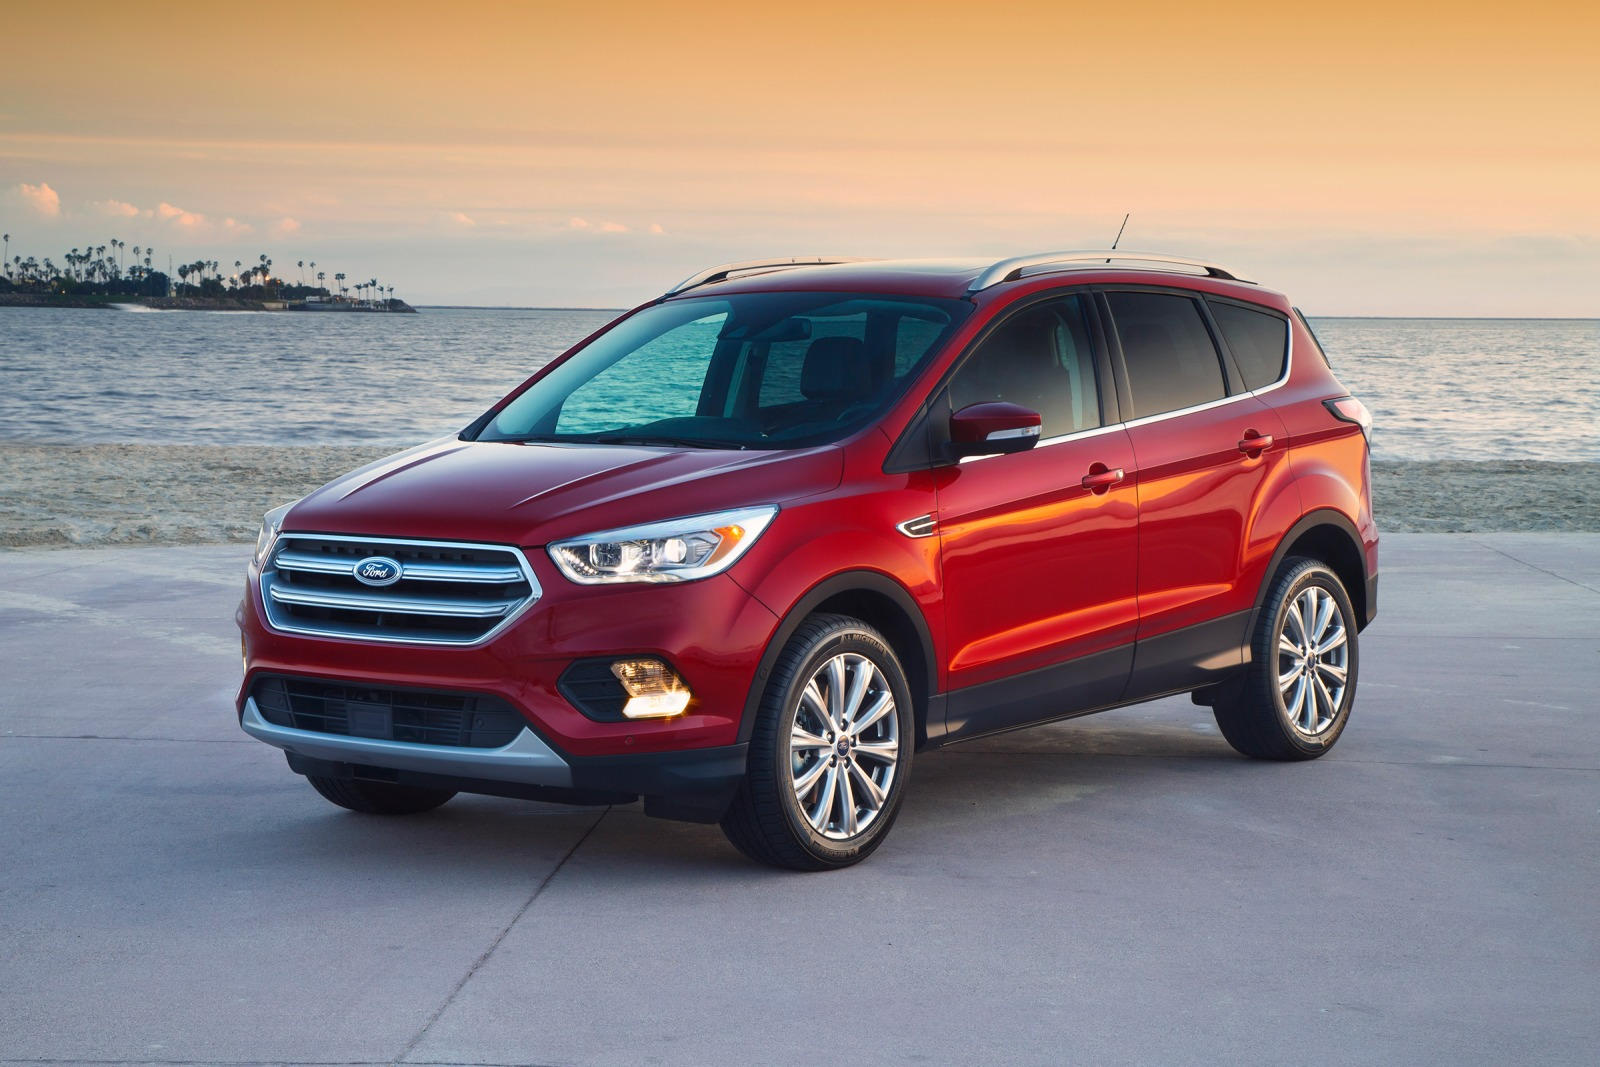 2018 Ford Escape Review Trims Specs Price New Interior Features 